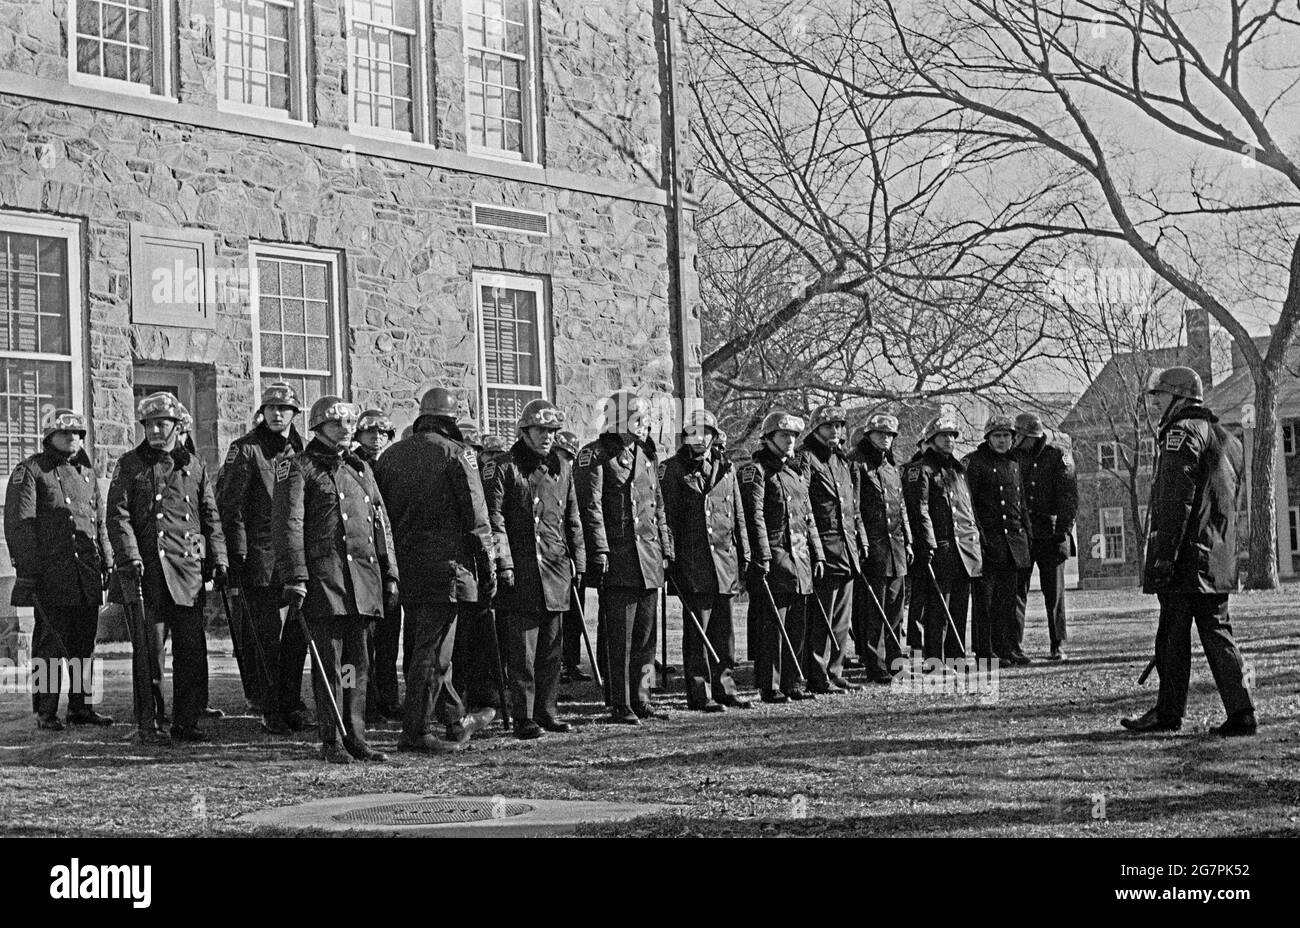 in the late 1960s Pennsylvania State Police   occupied campus of Cheyney State college a predominantly African American college. Stock Photo